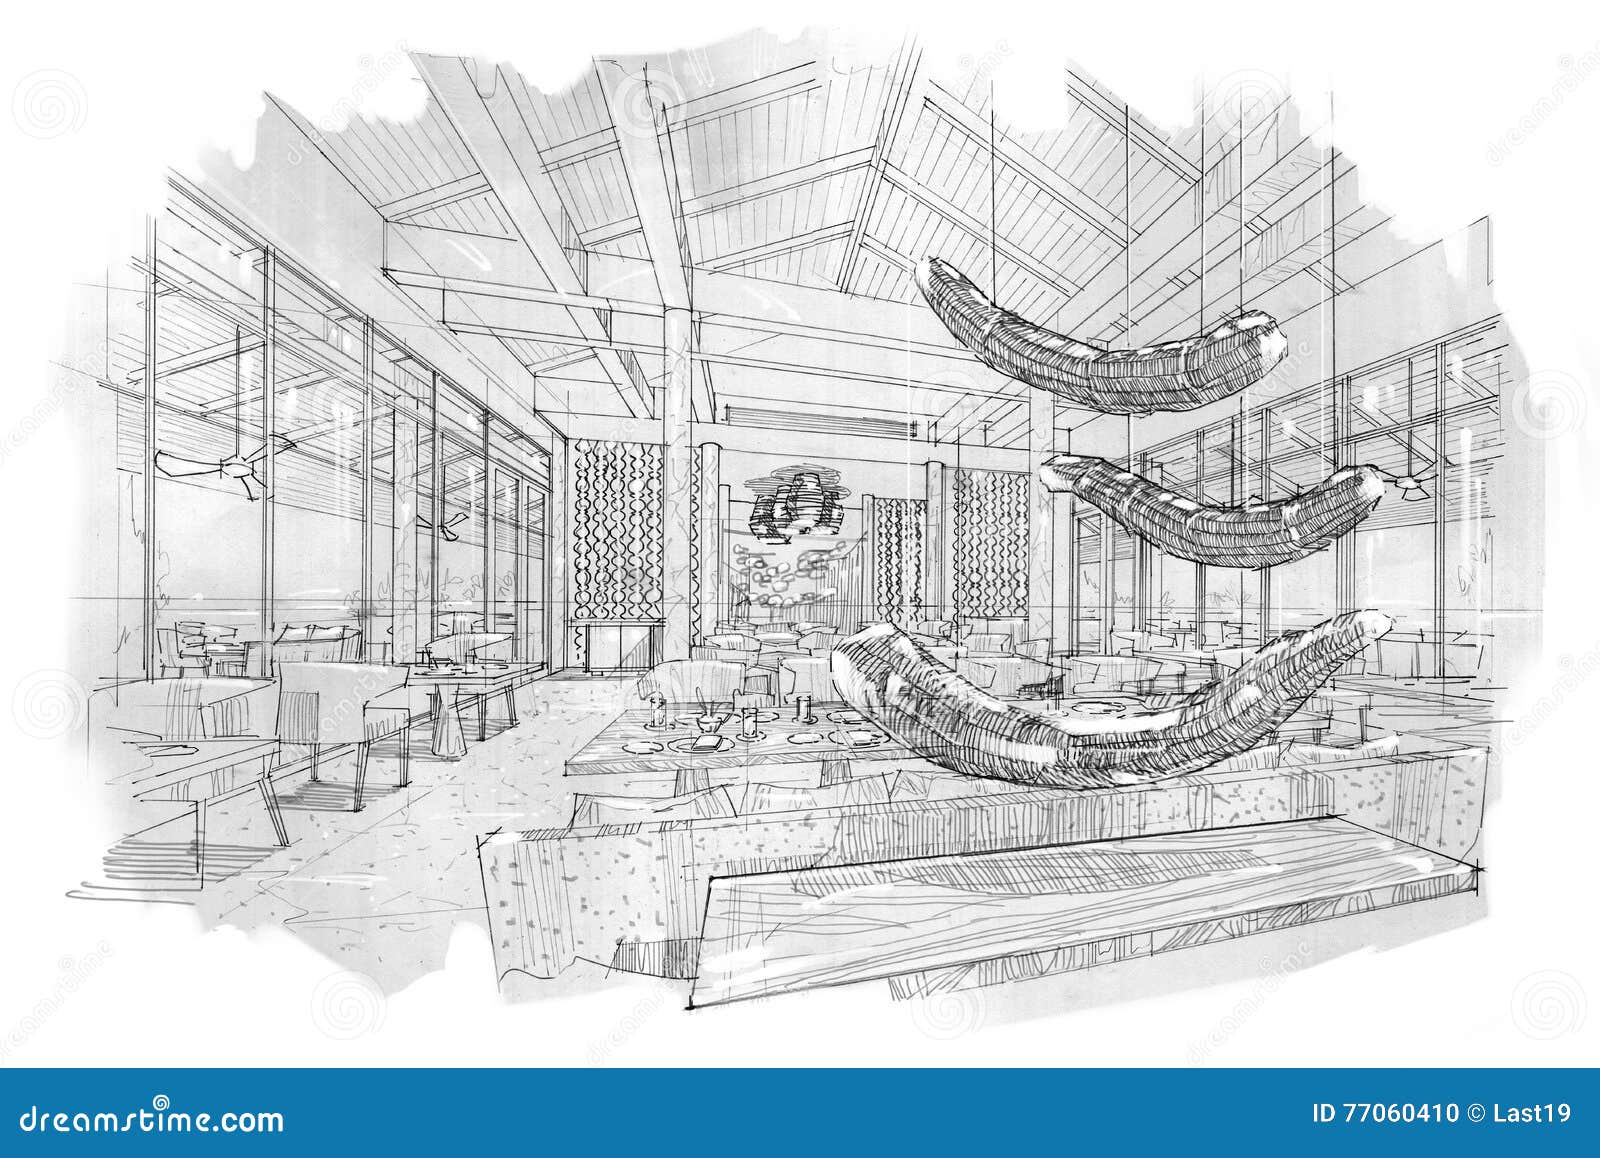 interior sketch of a large restaurant in eco style wood natural materials interior  design - Stock Image - Everypixel